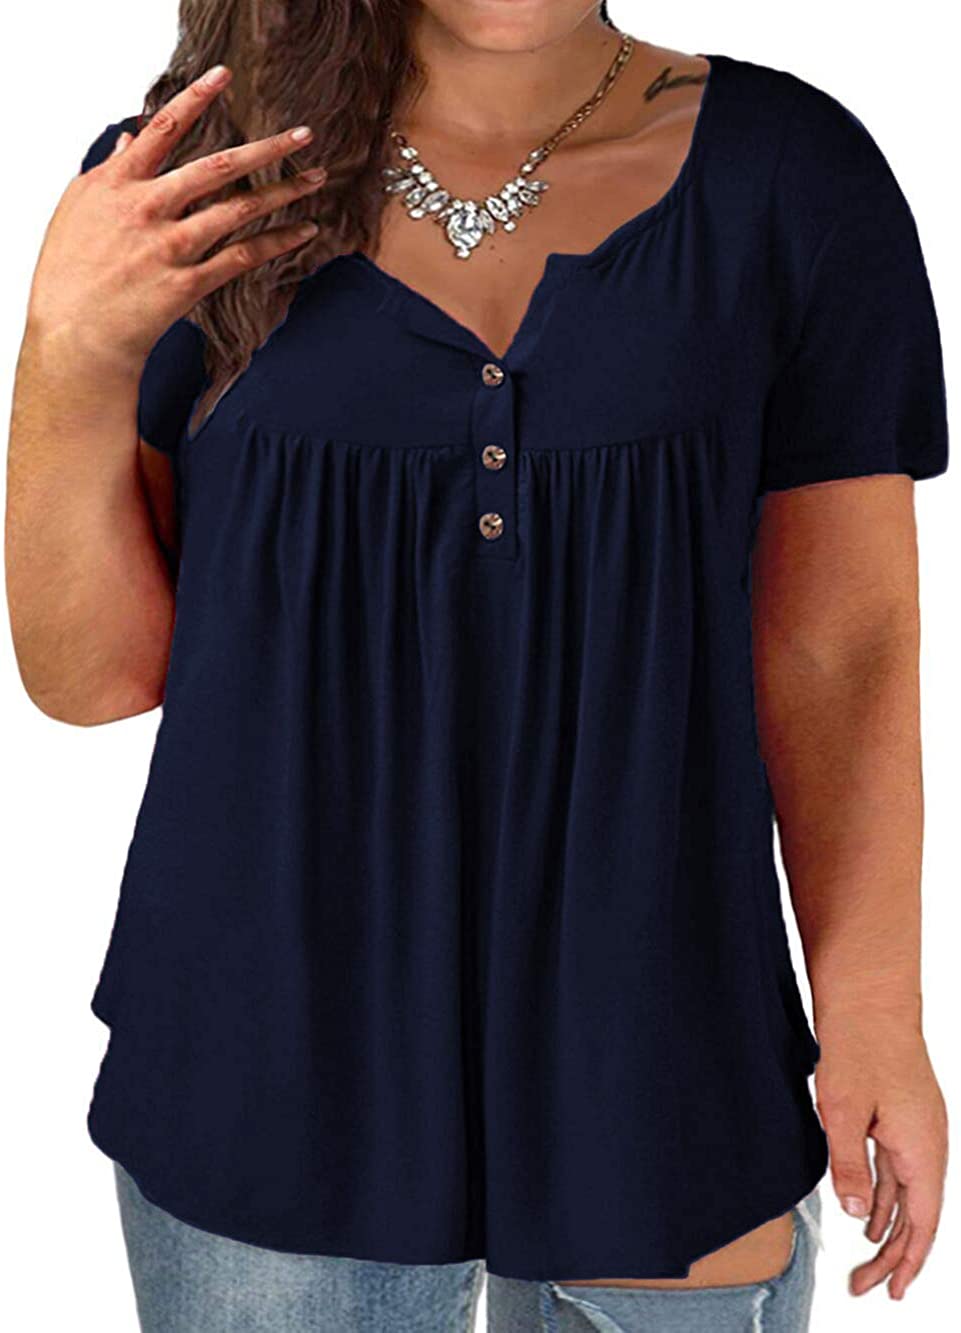 VOGRACE Plus-Size Tops for Women Summer Henley Shirts Flowy, 01_navy ...